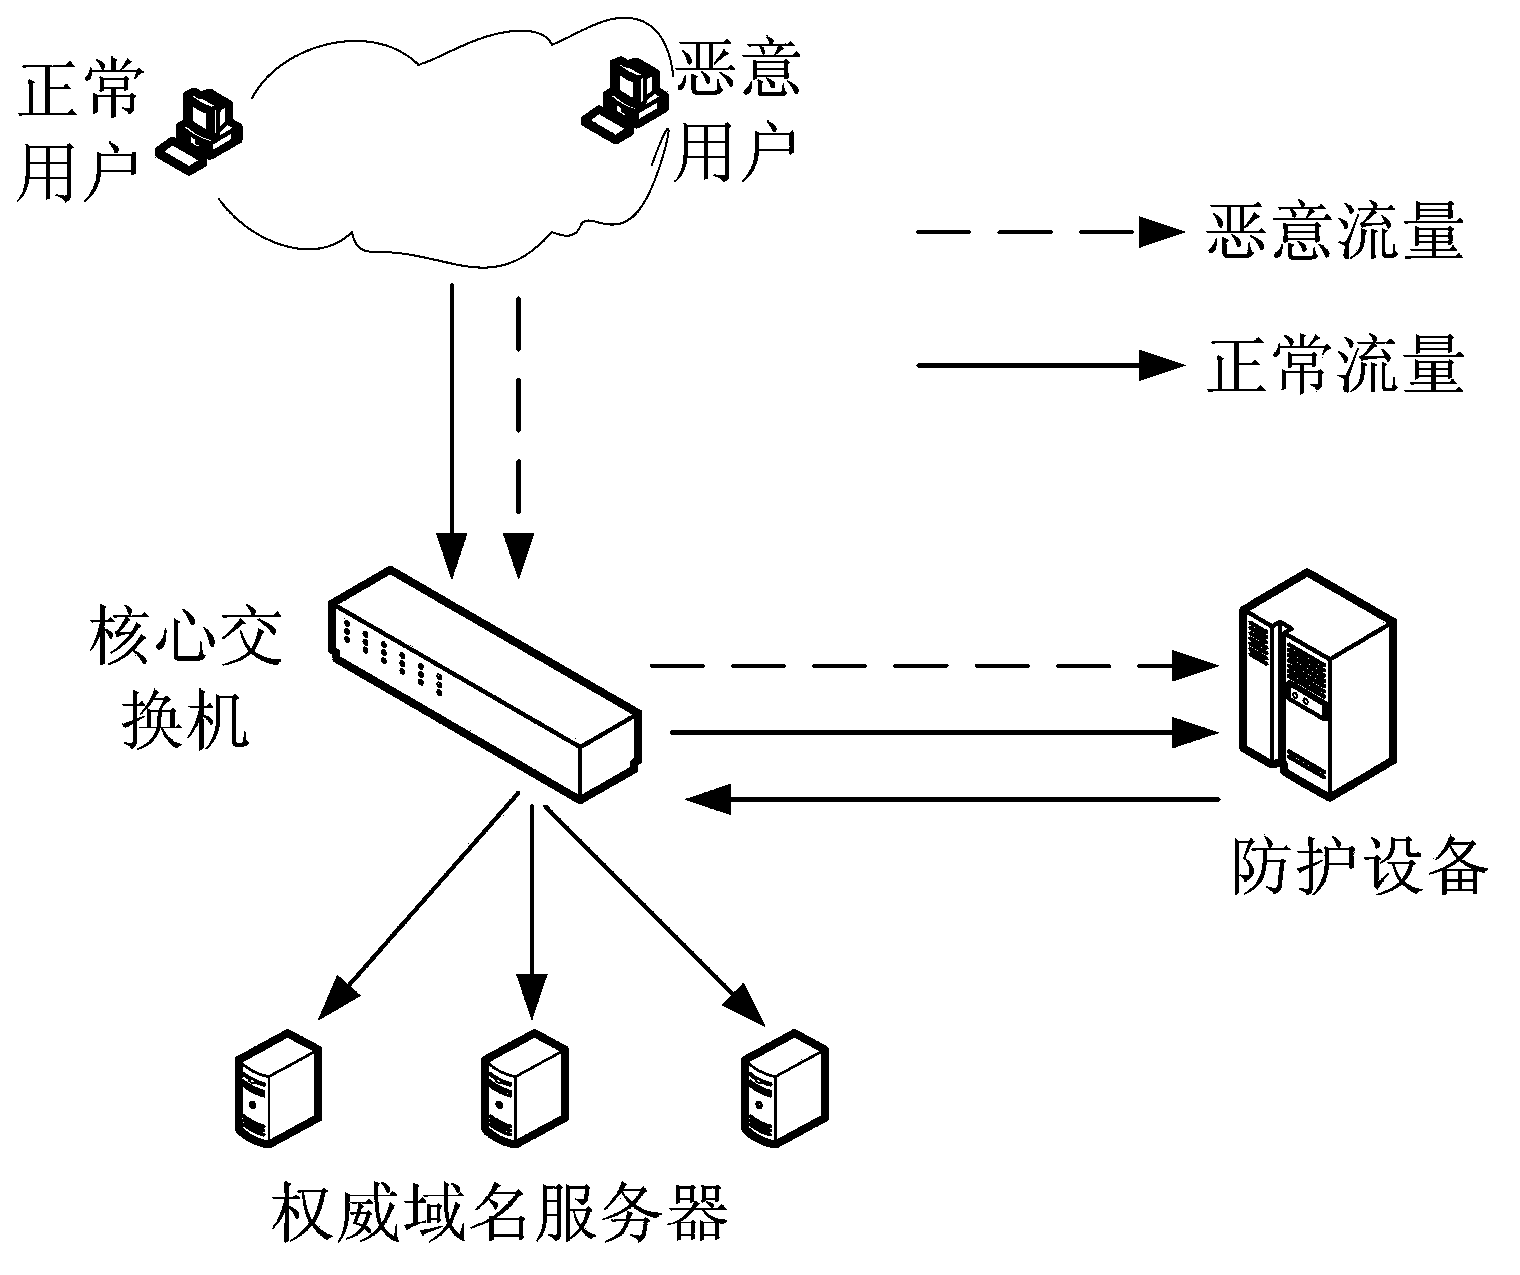 Method and system for detecting false attack sources